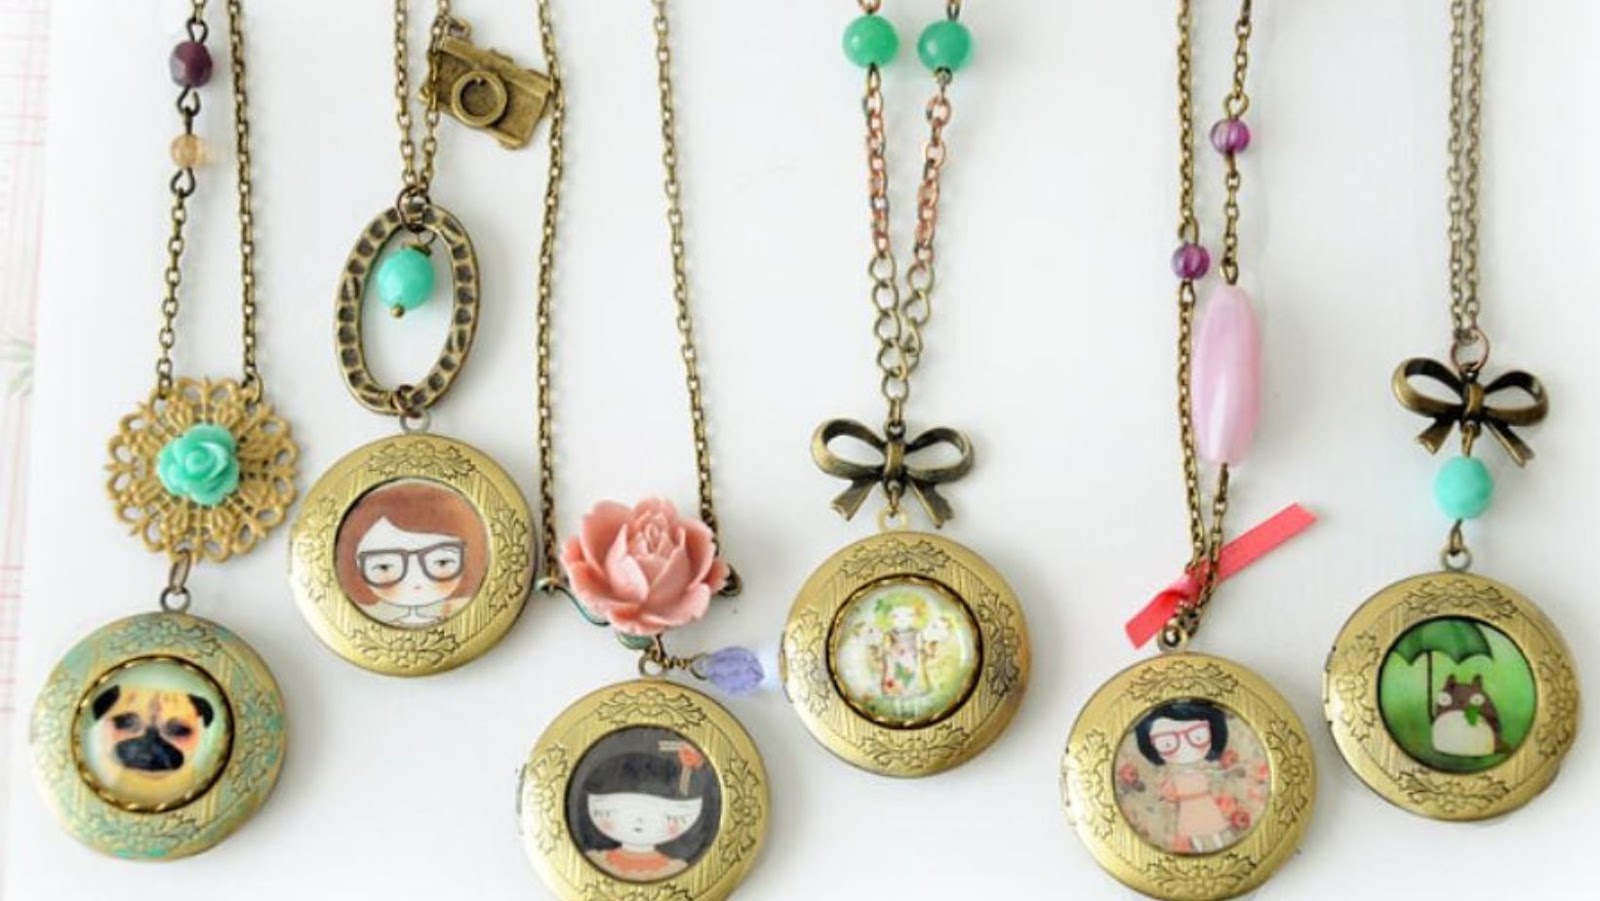 How Can a Locket Be Used?